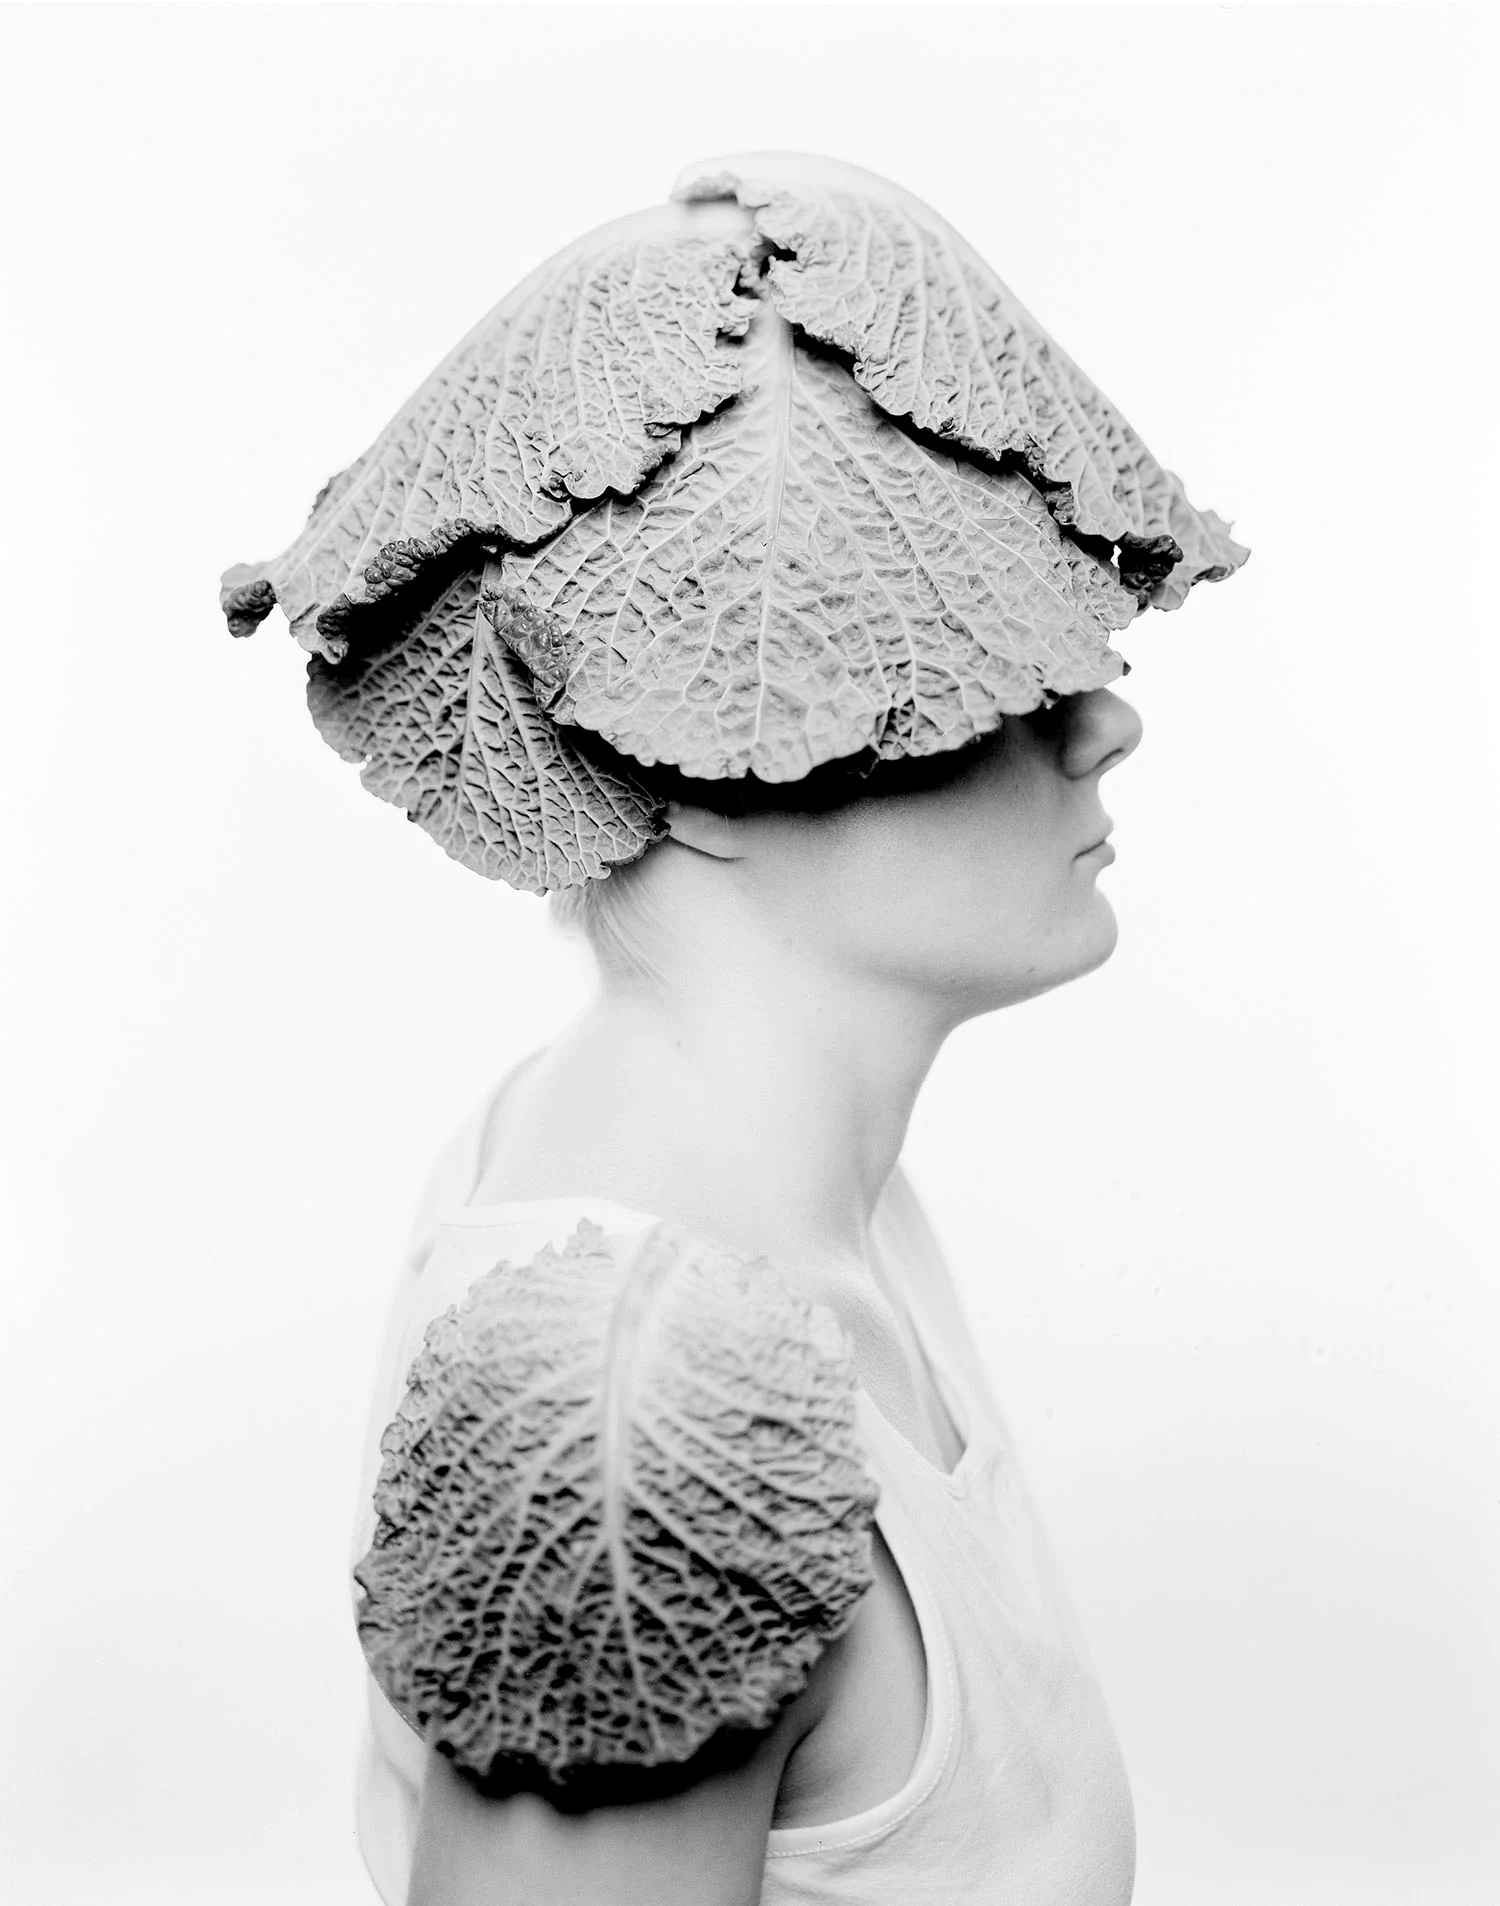 Large format portrait of young woman with cabbage leaves as head gear and shoulder pads